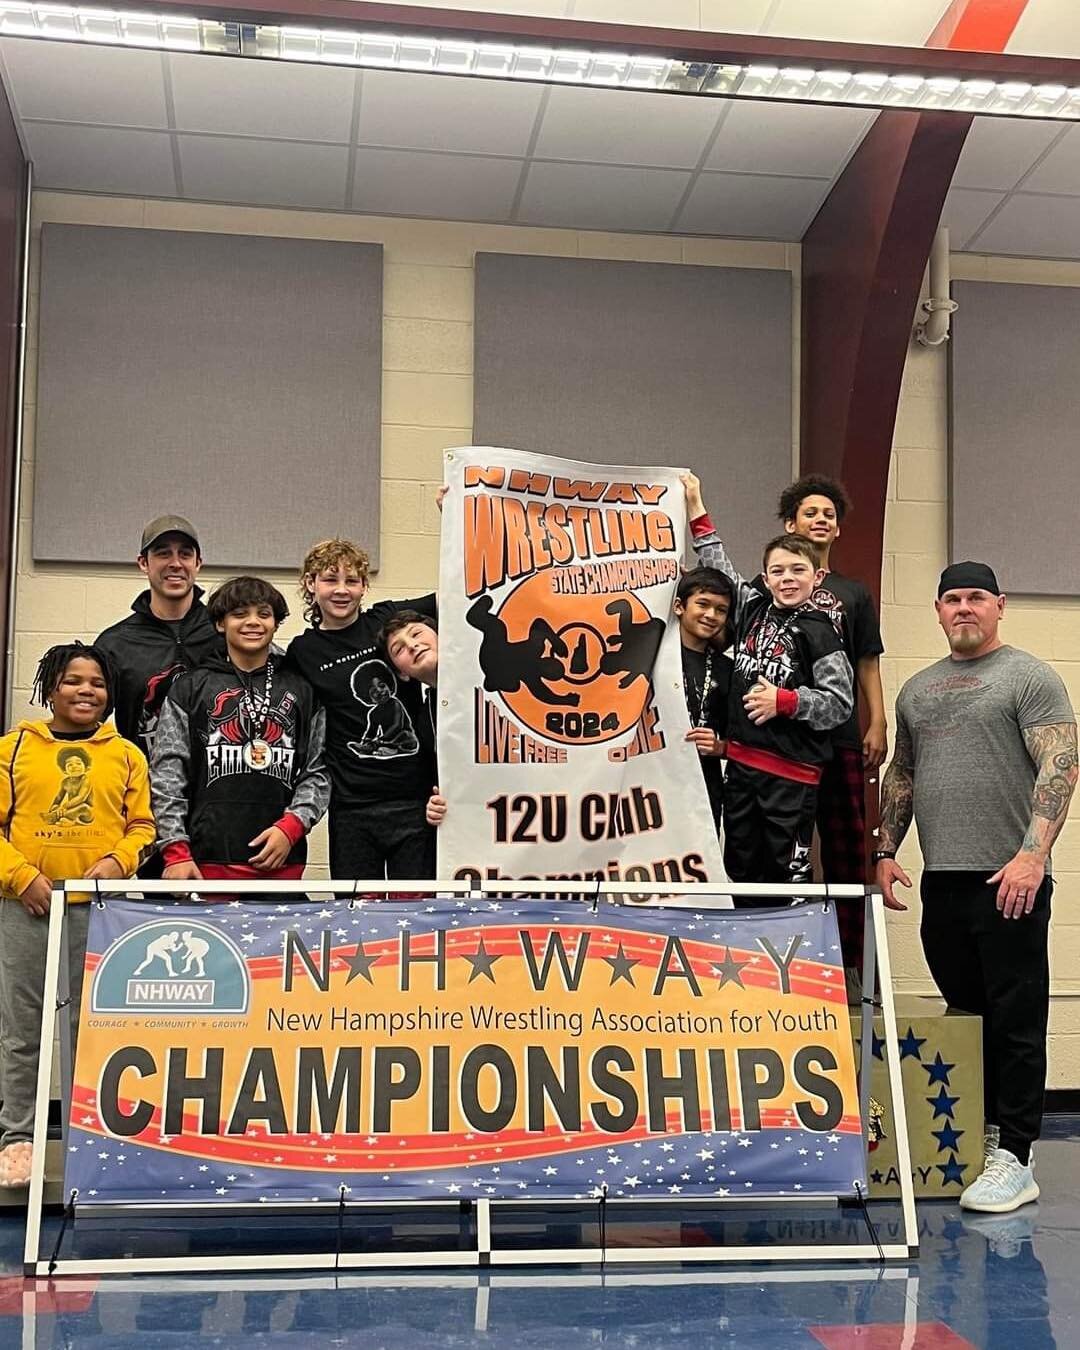 Congratulations to Empire Wrestling Club (our tenants), who just won the state championship!

#nashua #nashuanh #fitness #dojolife #community #wellness #congratulations